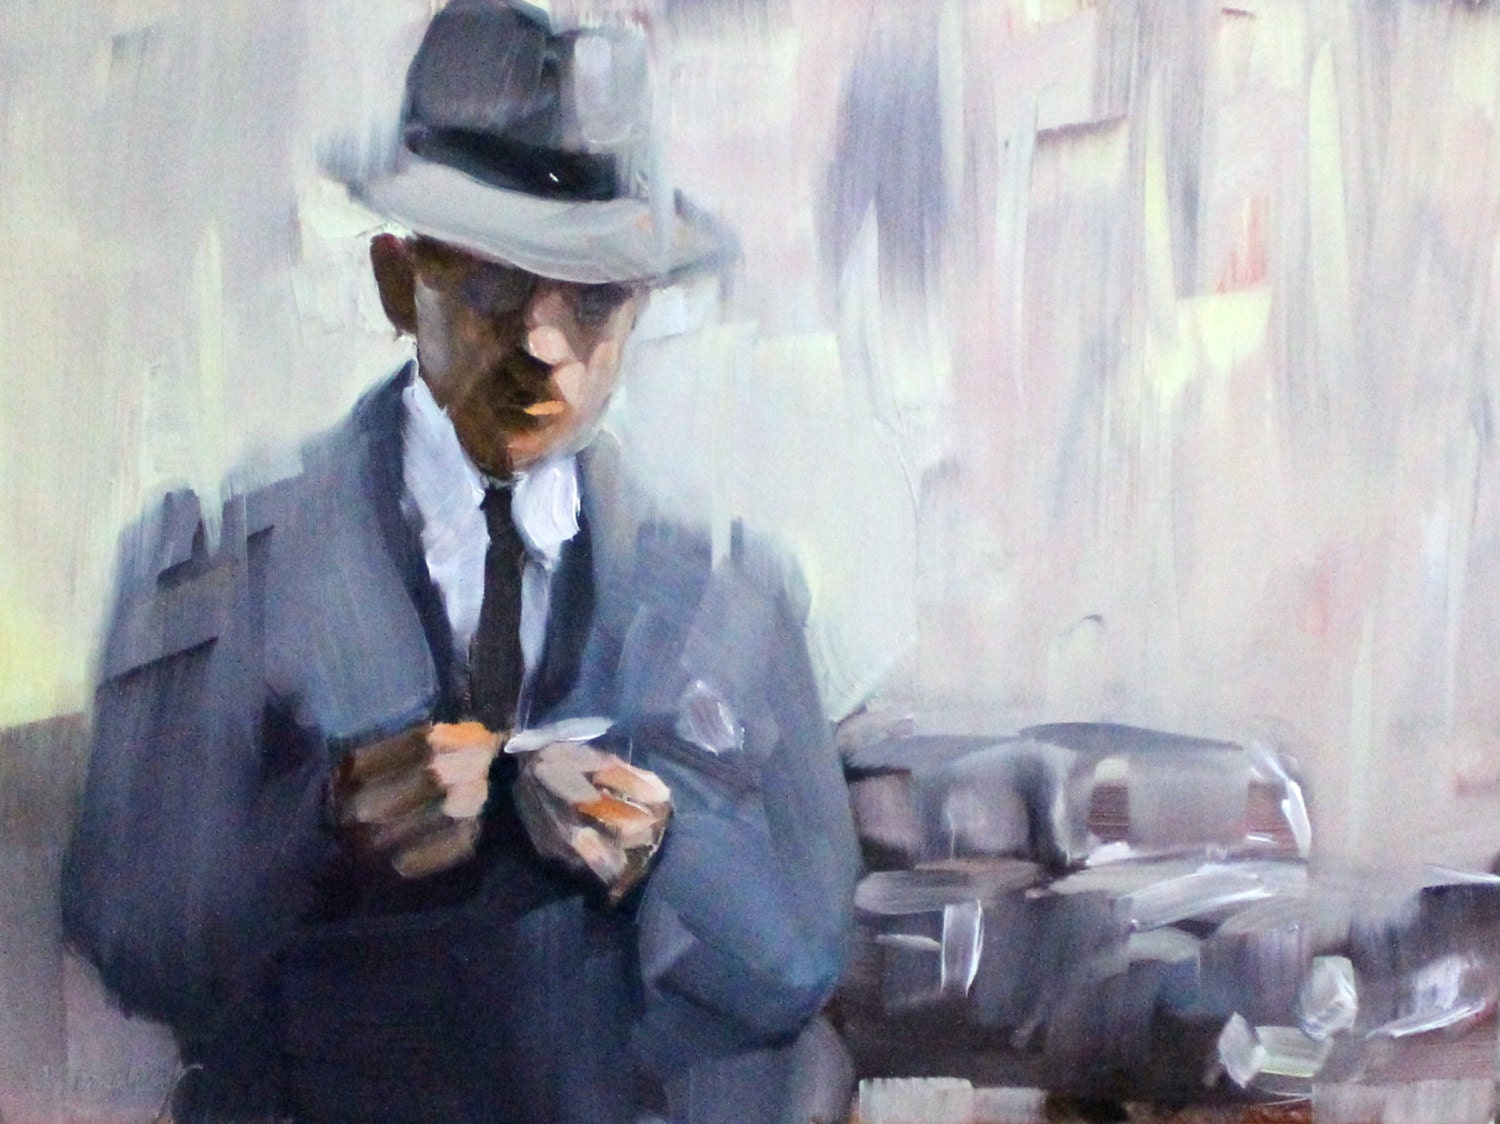 Rolling a Smoke in the Rain, 8"x10" on masonite panel  by Kenney Mencher